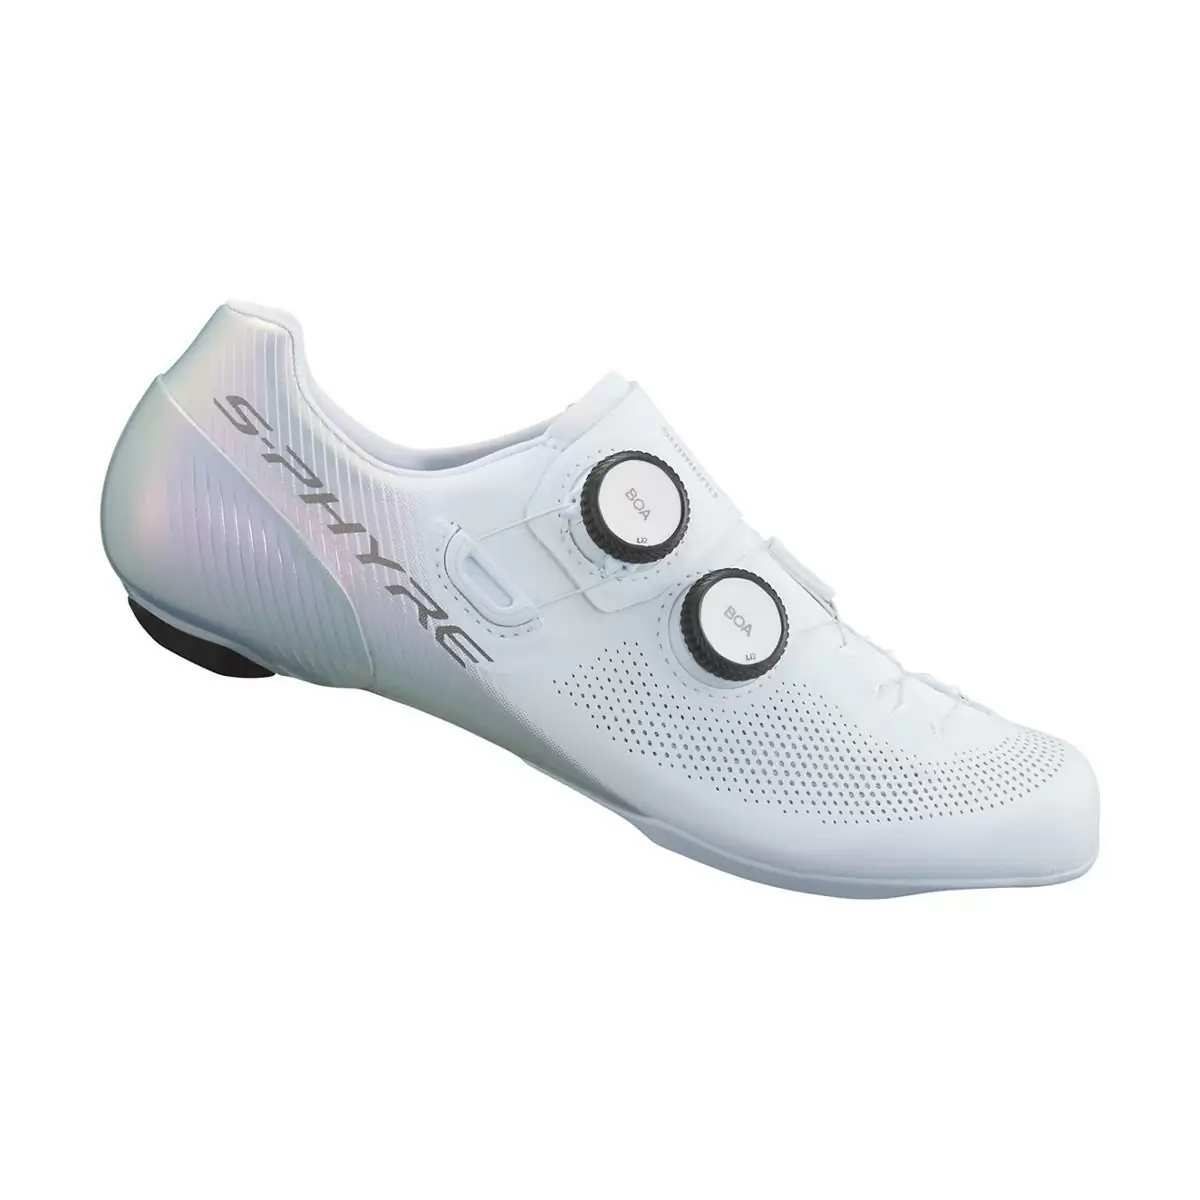 Road Shoes RC9 S-PHYRE SH-RC903 Woman White Size 36 - image